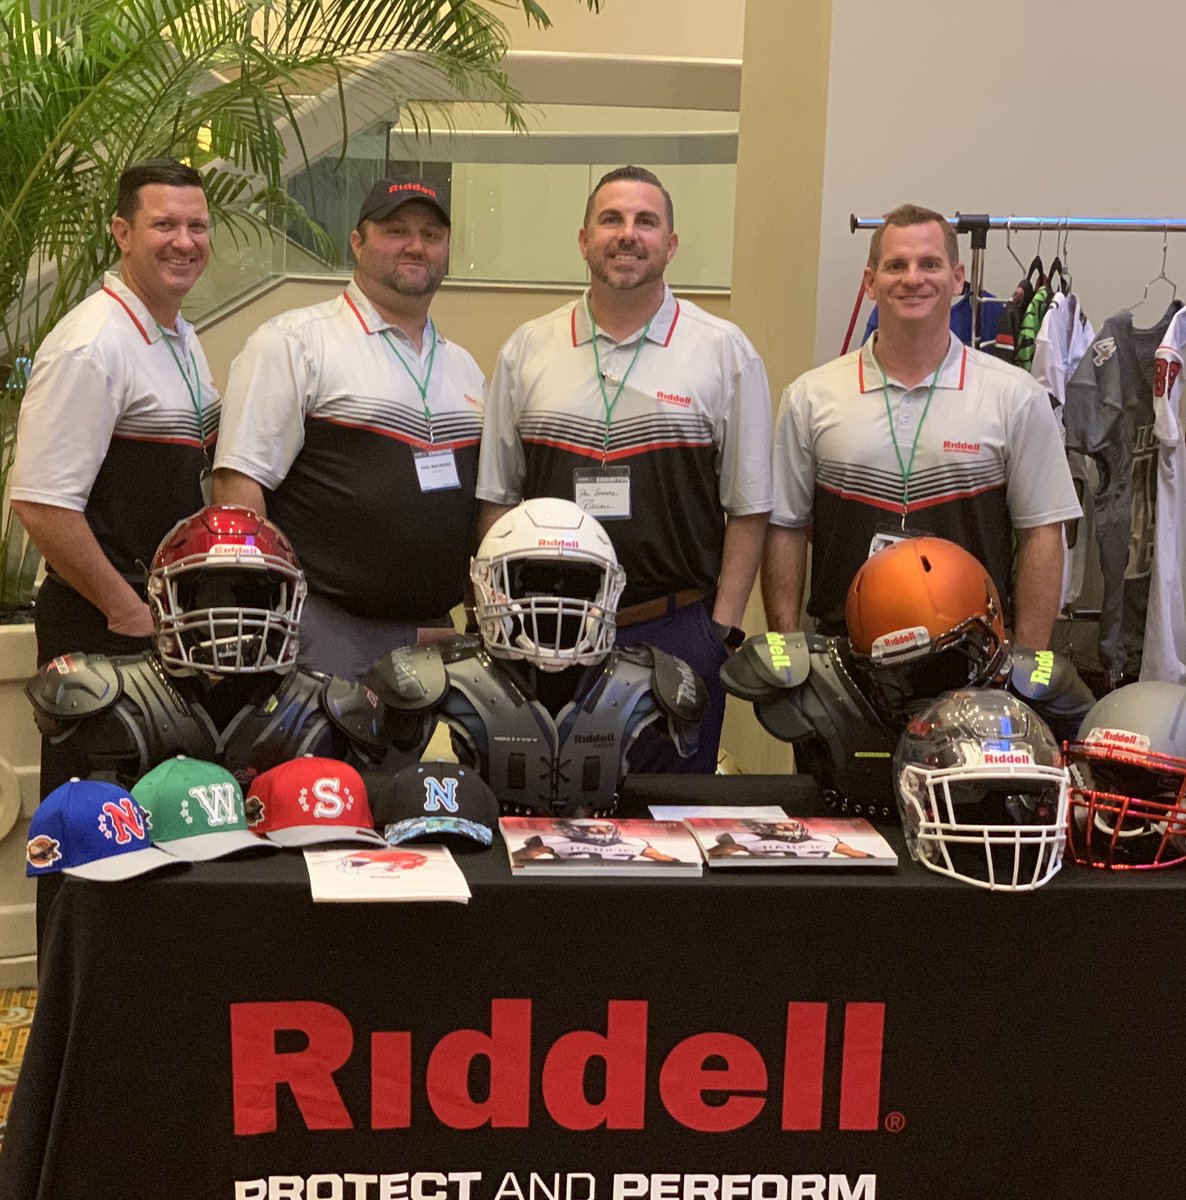 Come see #TeamRiddell at the Orlando @GlazierClinics #TheRiddellDifference